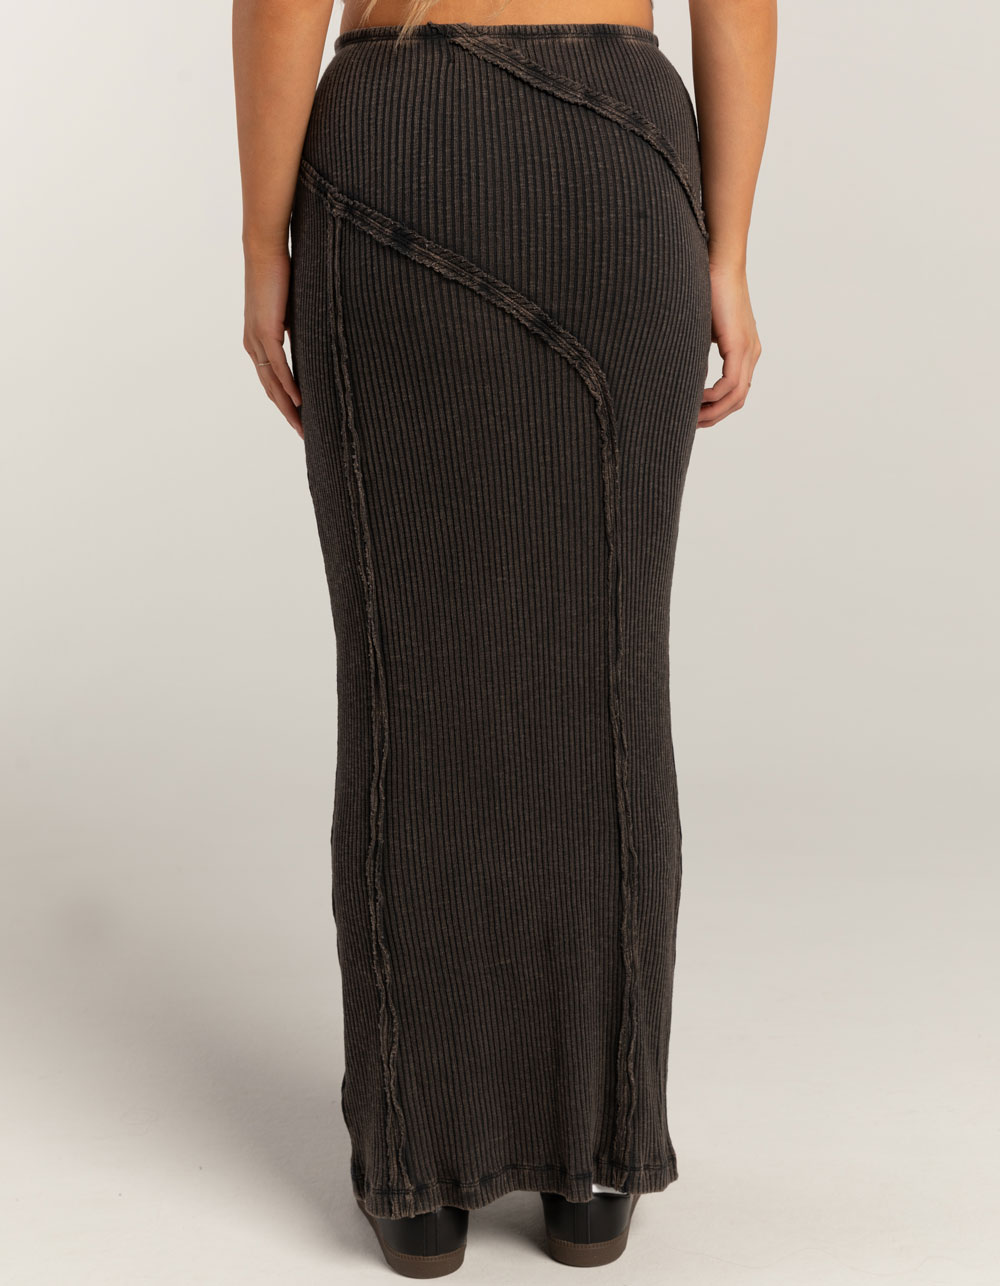 BDG Urban Outfitters Washed Rib Seam Womens Maxi Skirt - WASHED BLACK ...